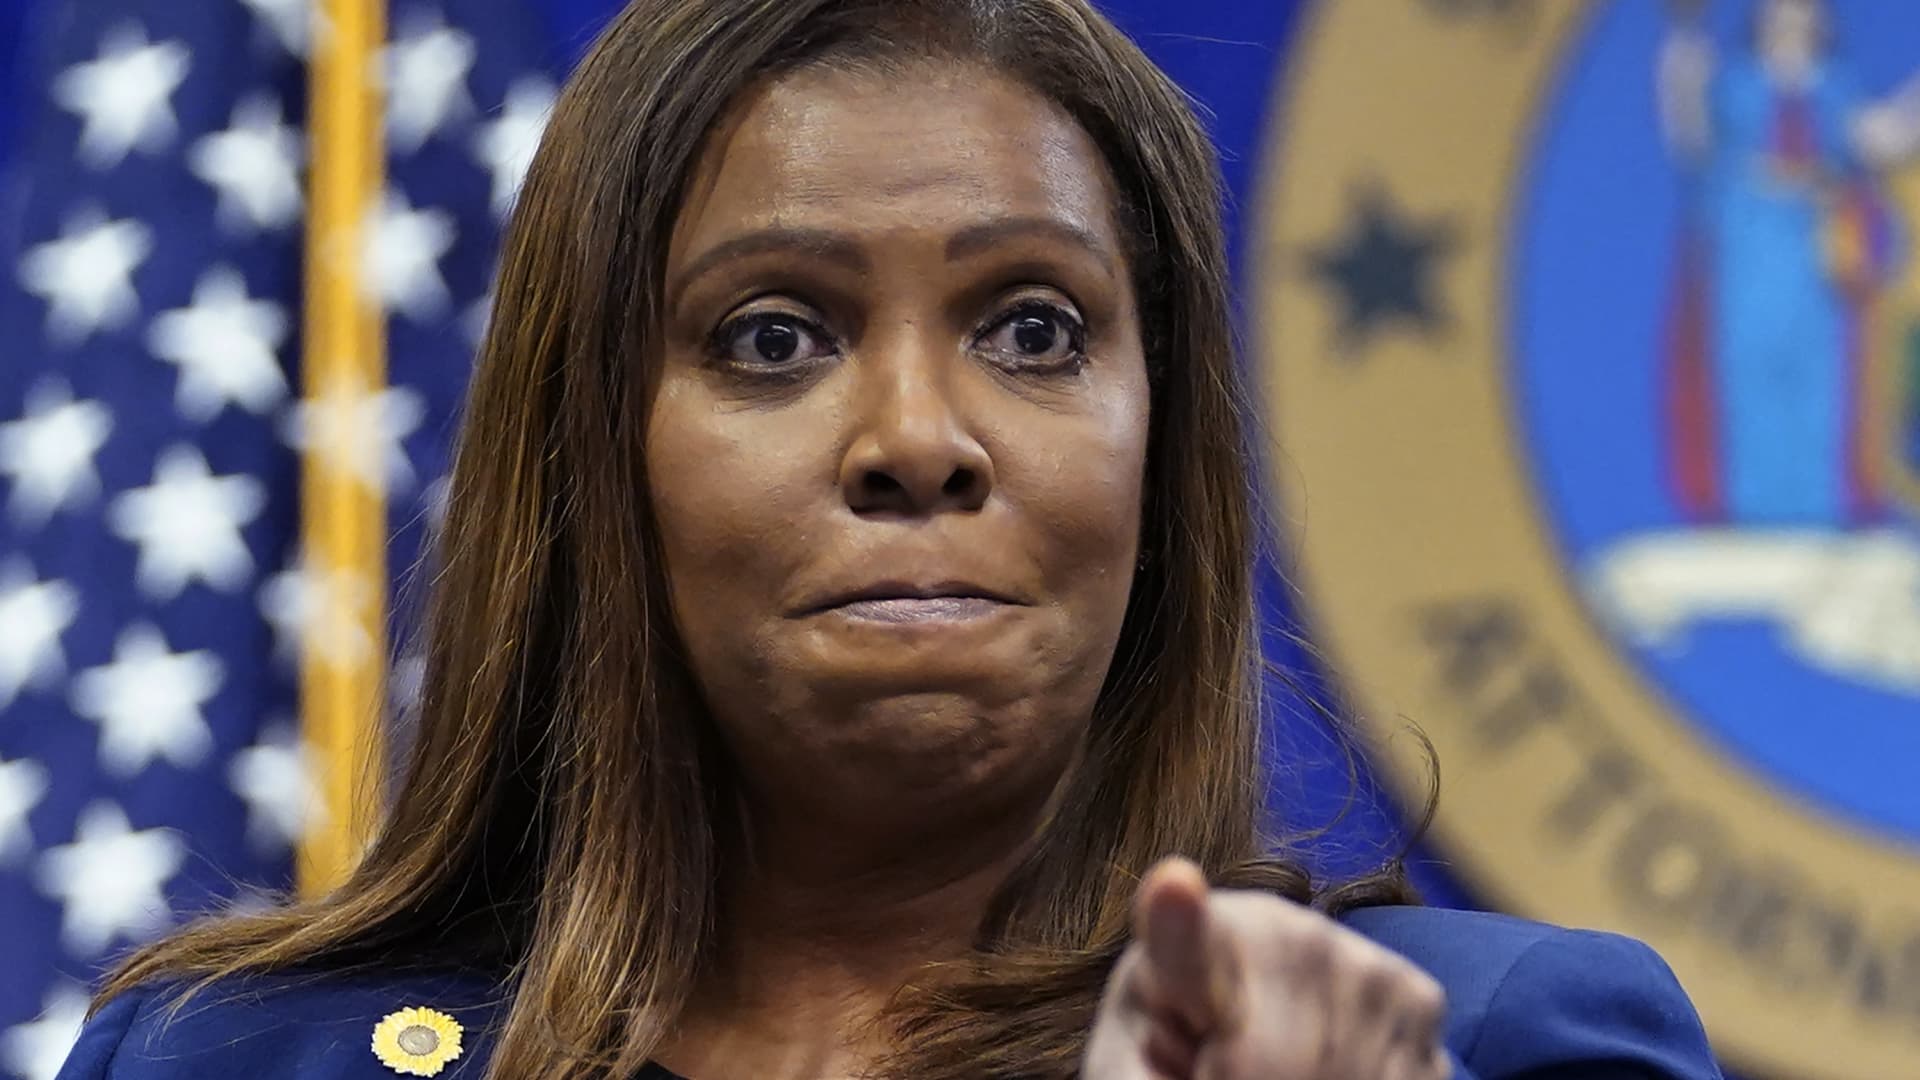 Watch: New York Attorney General Letitia James, foe of Trump, delivers what she calls ‘major announcement’